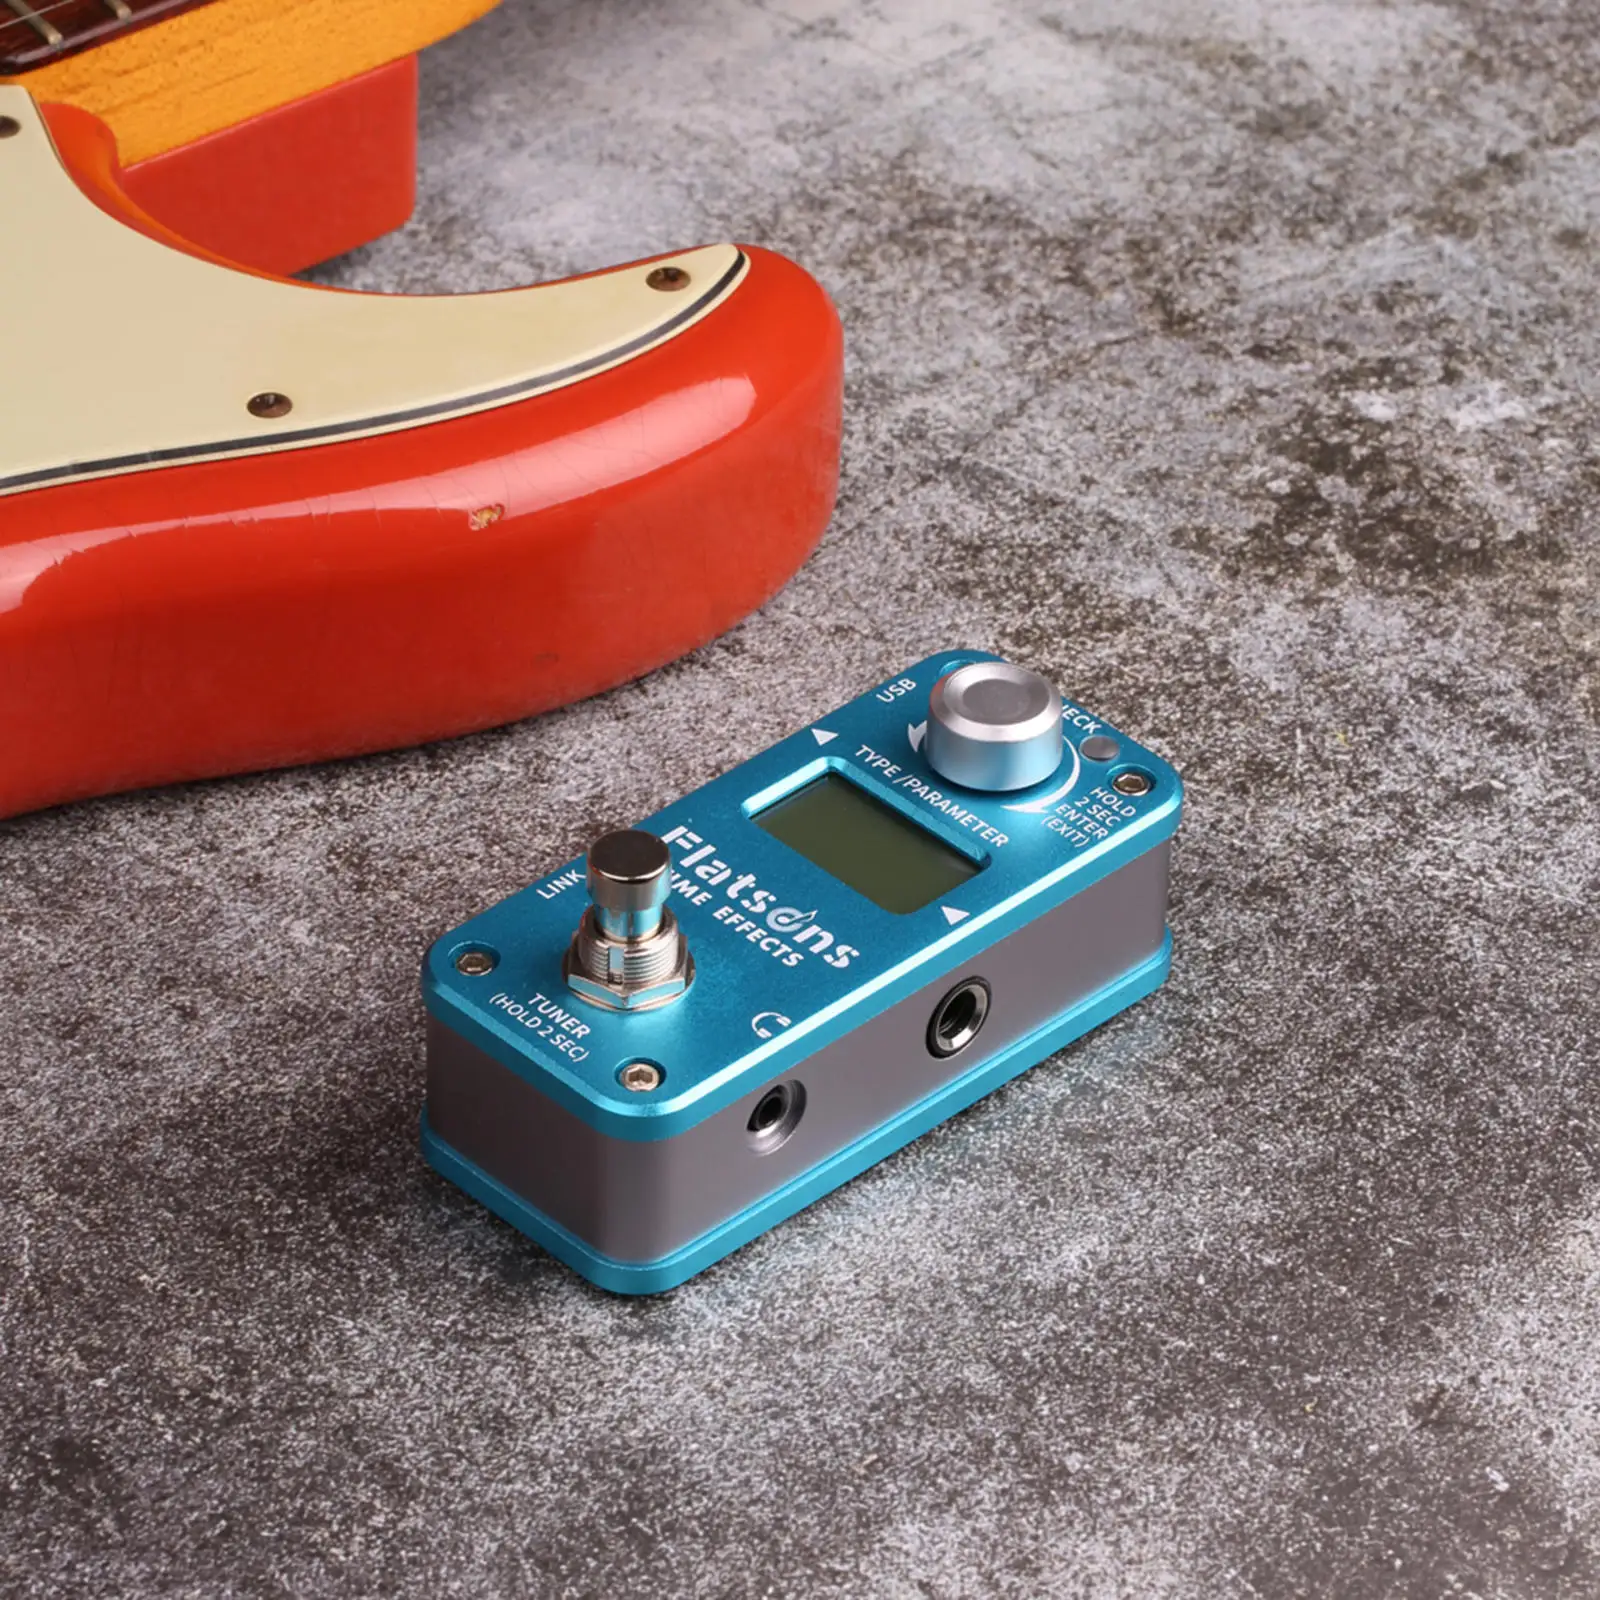 Guitar Effect Pedal Built-in Delay Reverb Overdrive Distortion Time Effects Guitar Accessories for Electric/Acoustic Guitar